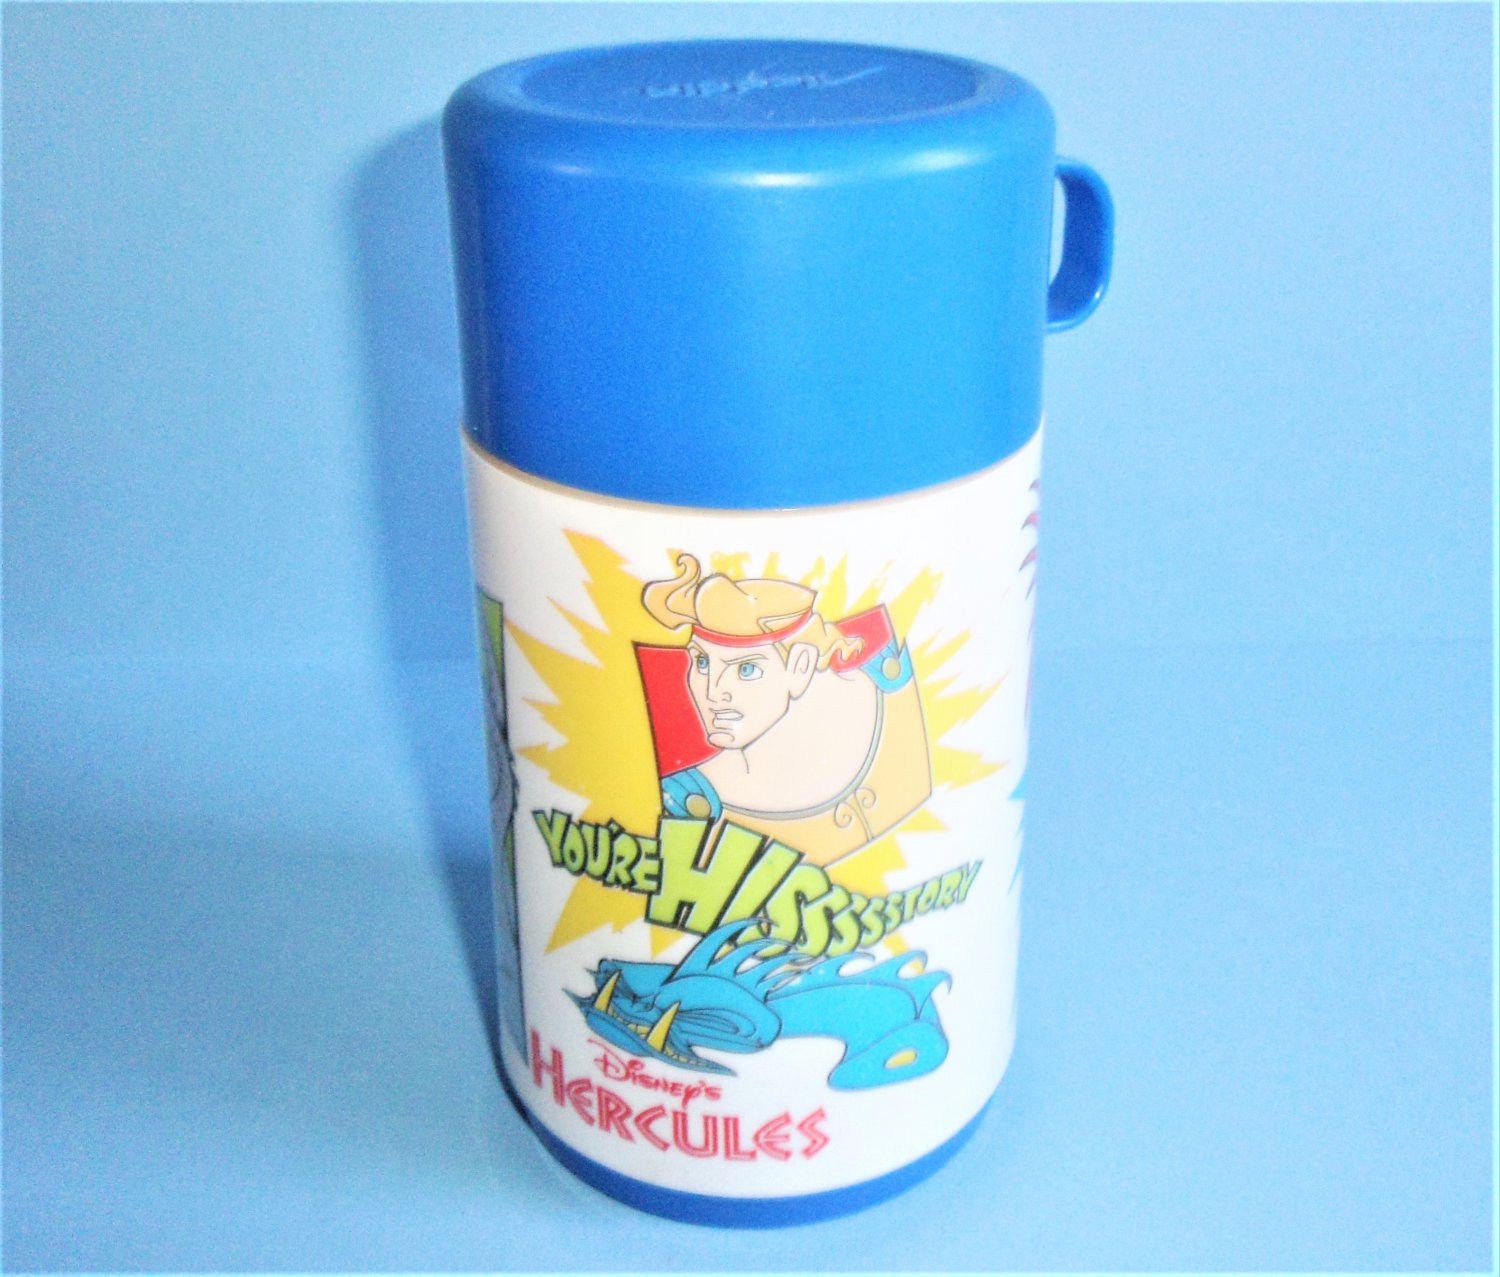 Disney Hercules Plastic Thermos With Cup or Mug Style Lid Made By Aladdin Vintage